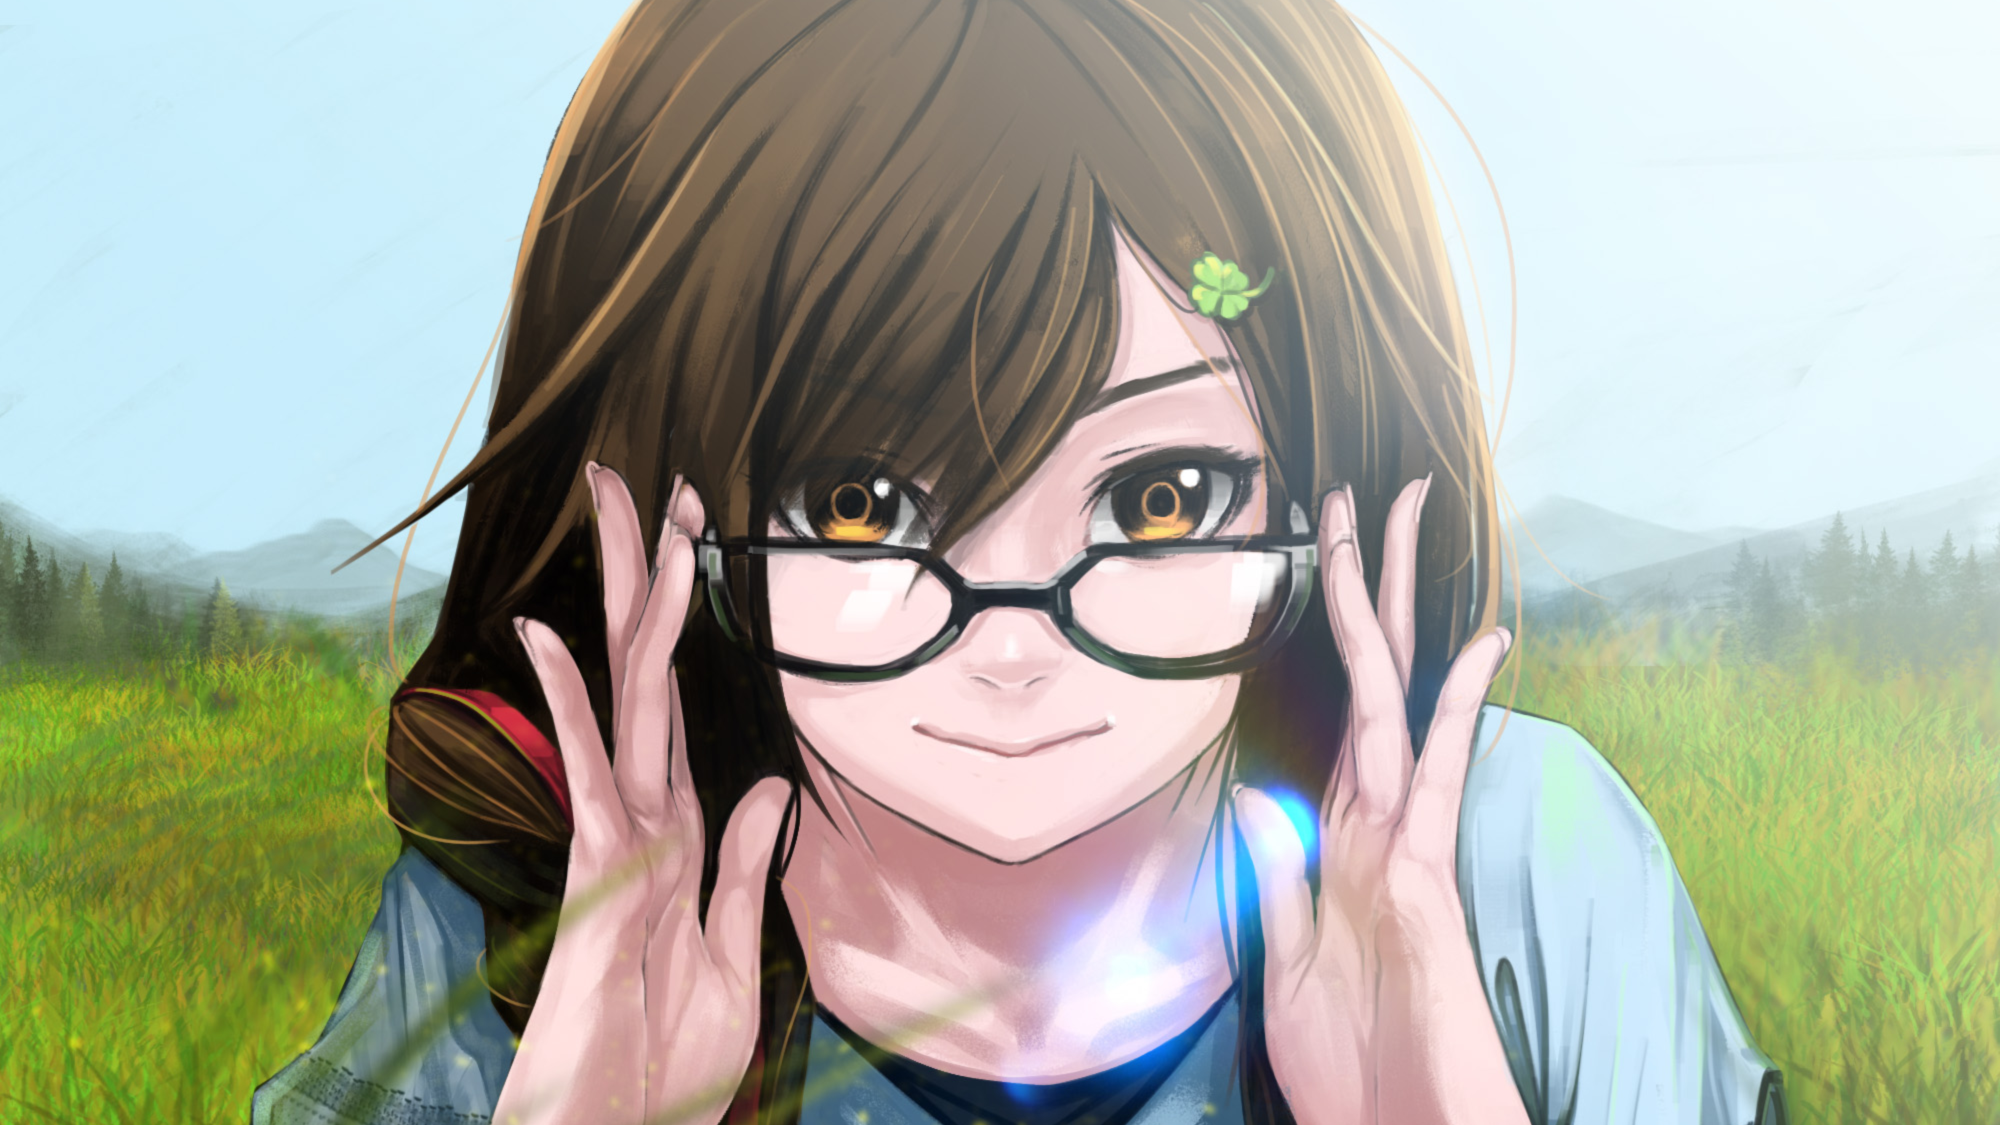 Wallpaper : anime girls, picture in picture, Raidy hd 1080x1902 - othmane -  1431351 - HD Wallpapers - WallHere